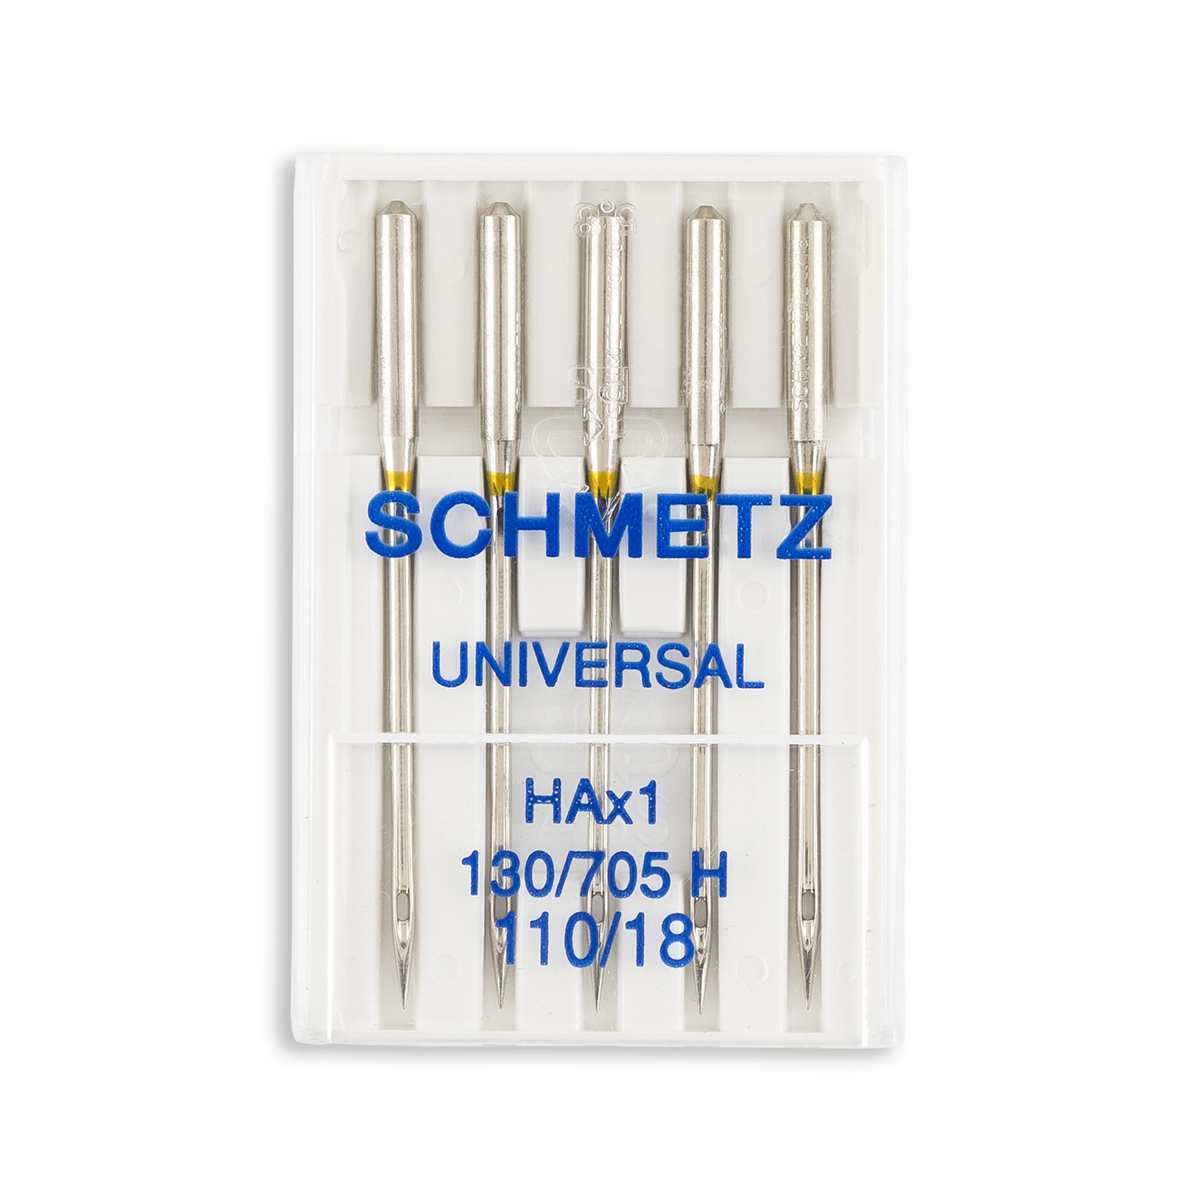 SCHMETZ Leather (130/705 HLL / 15X2NTW) Sewing Machine Needles - Carded -  Assorted